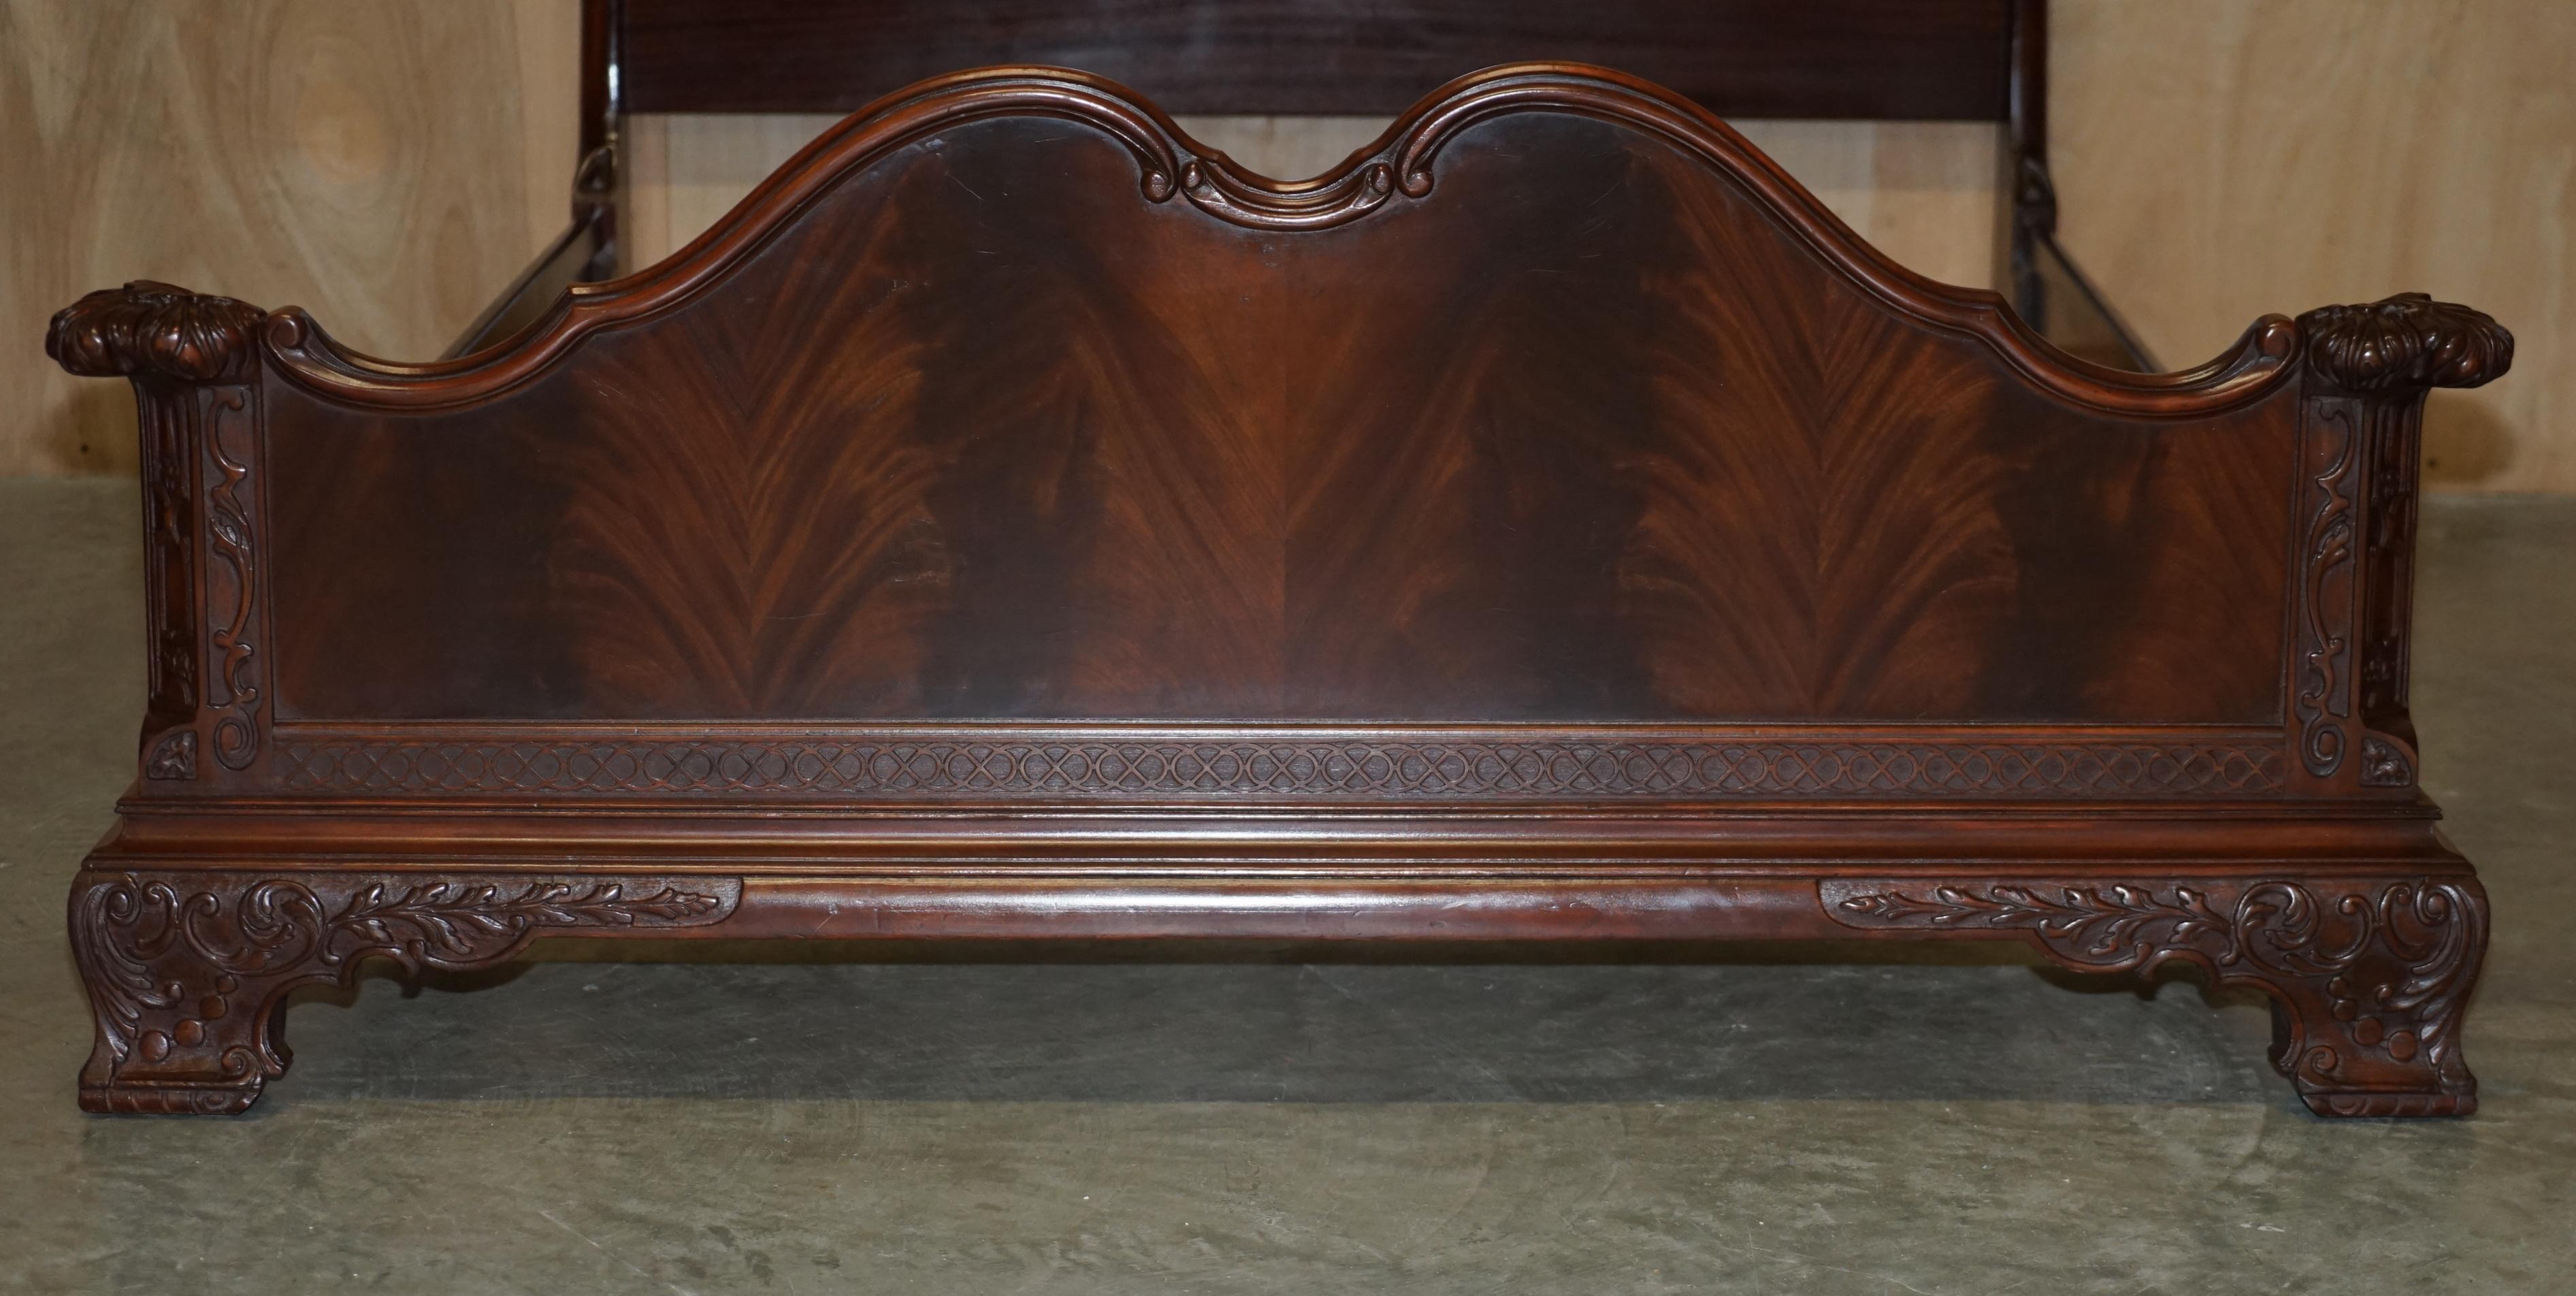 Late 19th Century EXQUISITELY CARVED ANTIQUE ViCTORIAN CIRCA 1880 FLAMED HARDWOOD DOUBLE BED FRAME For Sale